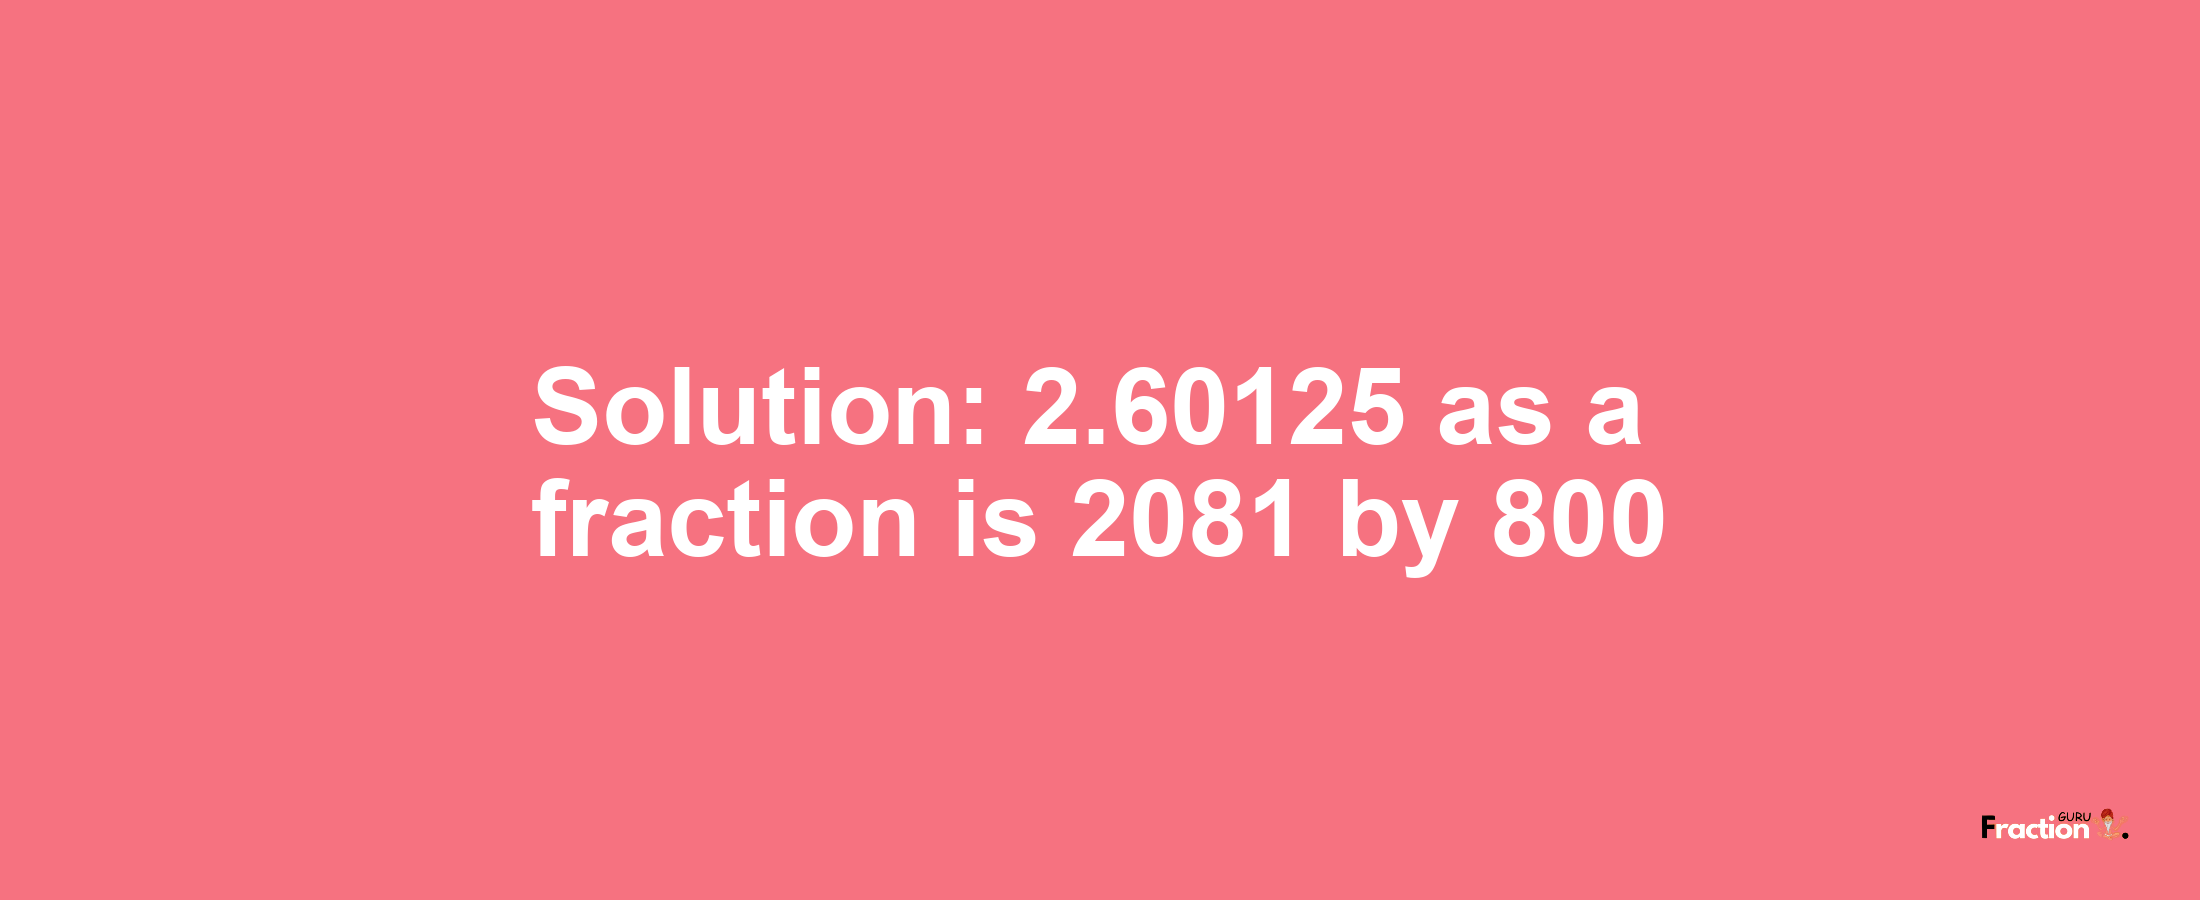 Solution:2.60125 as a fraction is 2081/800